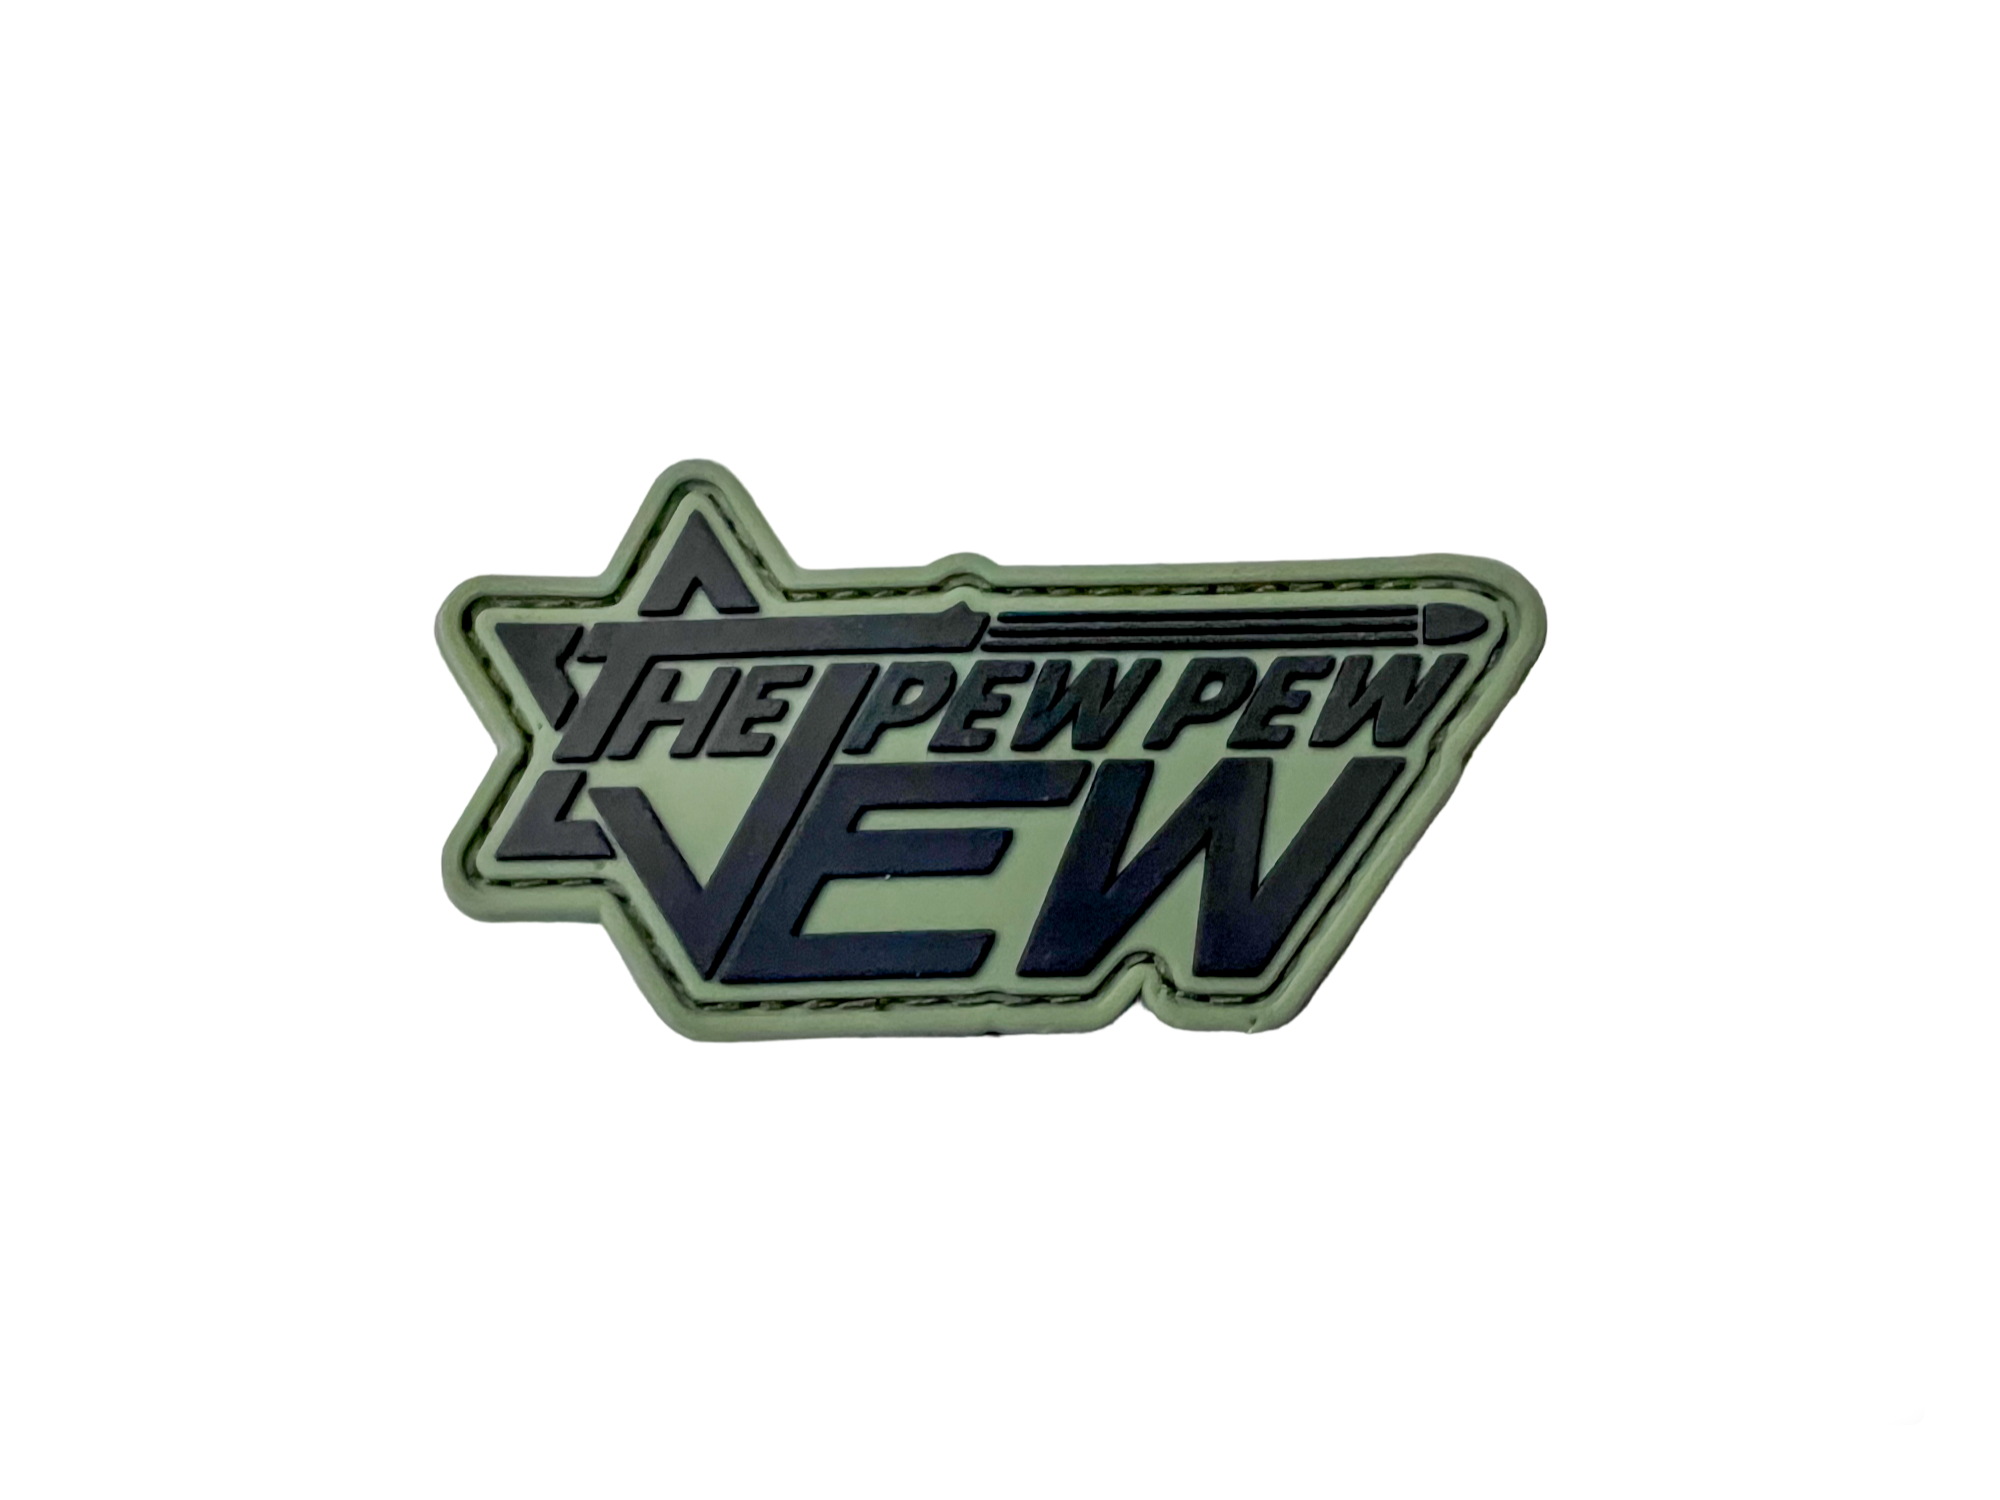 FAFO Patch – The Pew Pew Jew